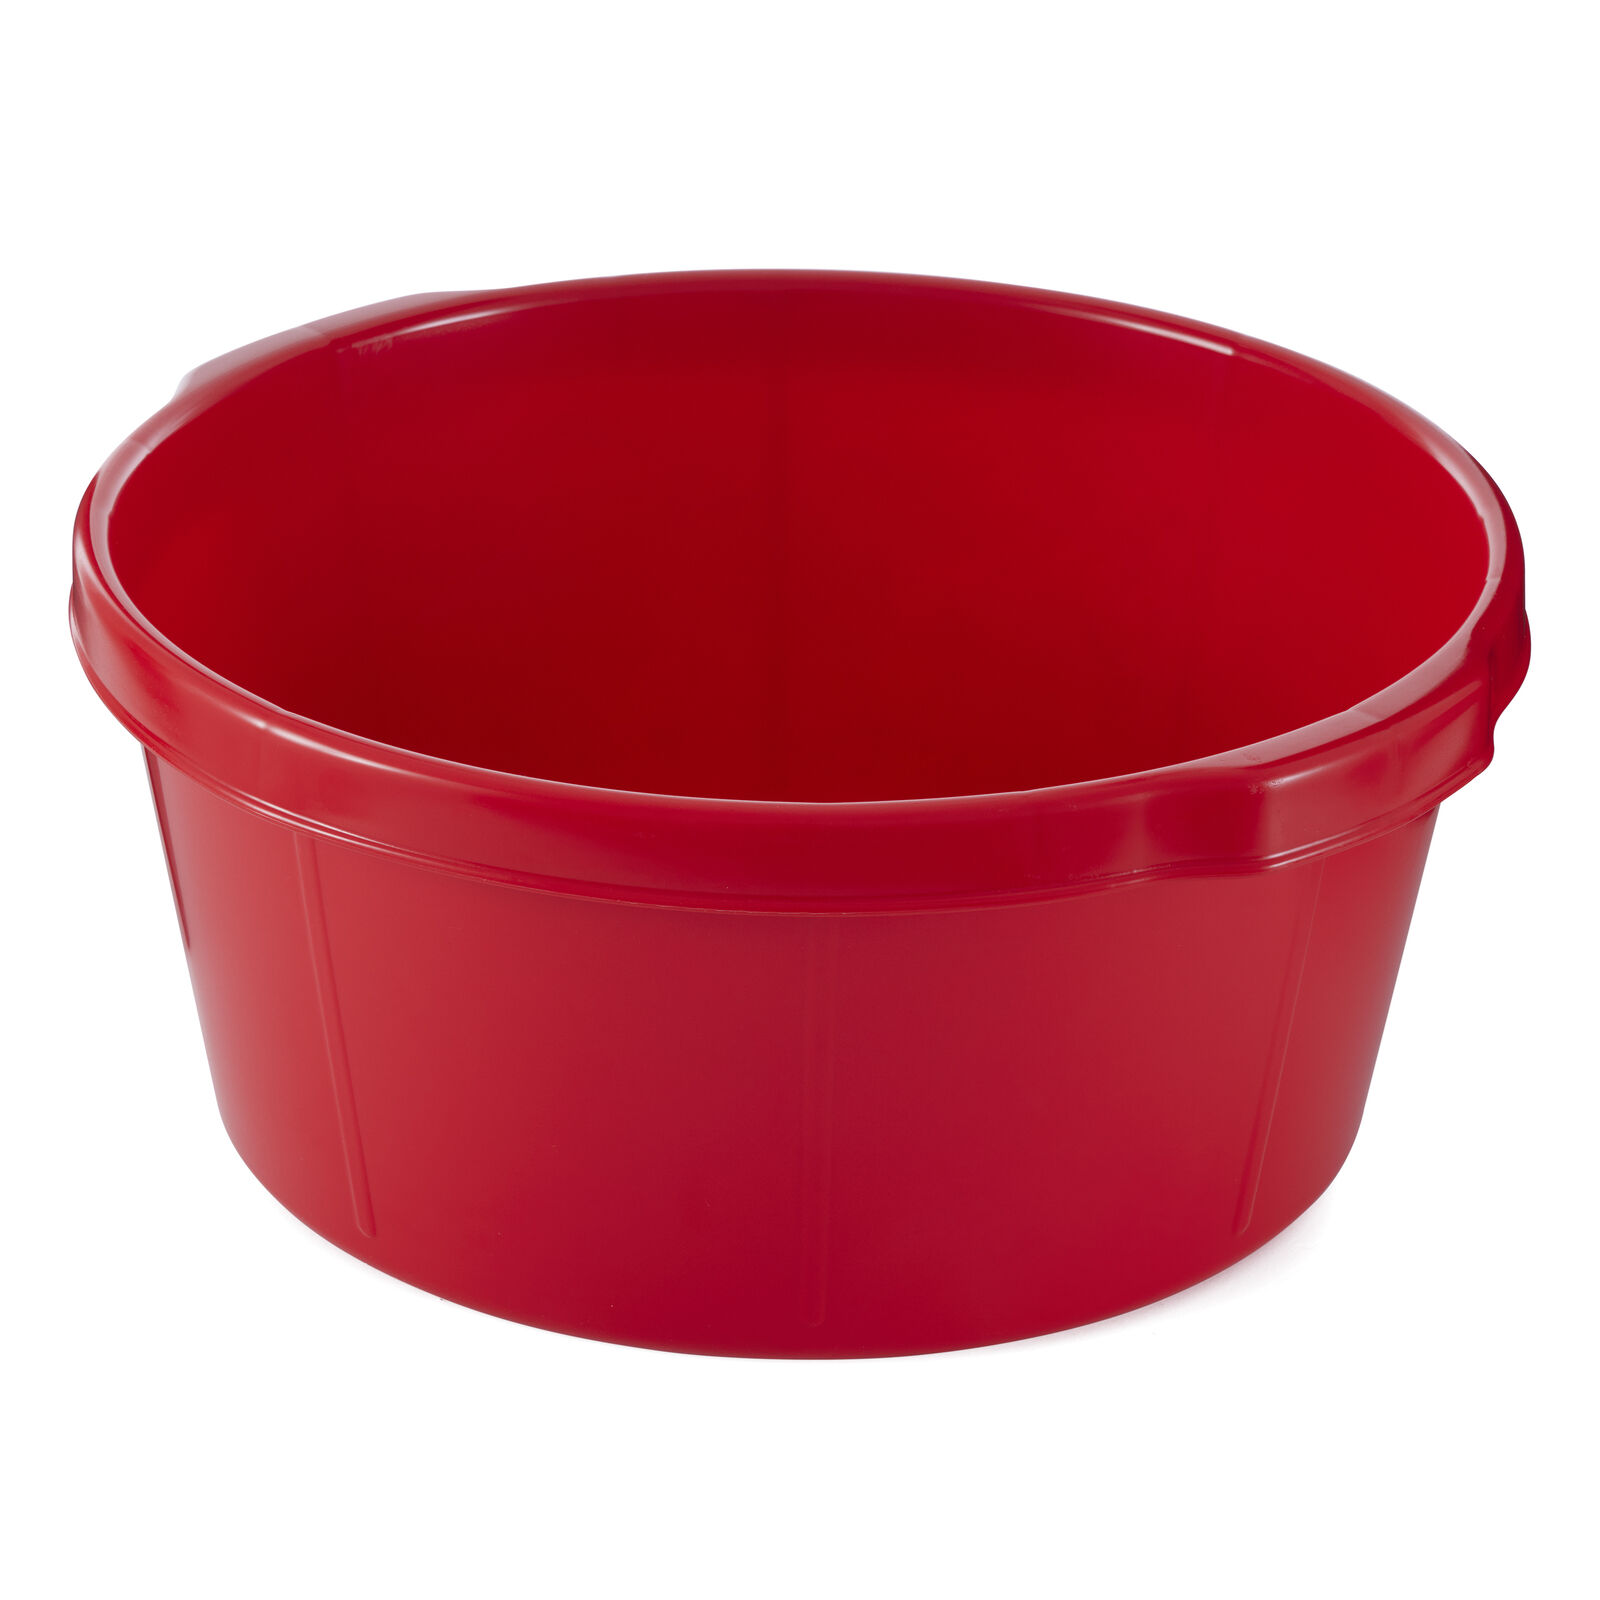 Little Giant 6.5 Gallon Plastic All Purpose Farm and Ranch Utility Tub, Red